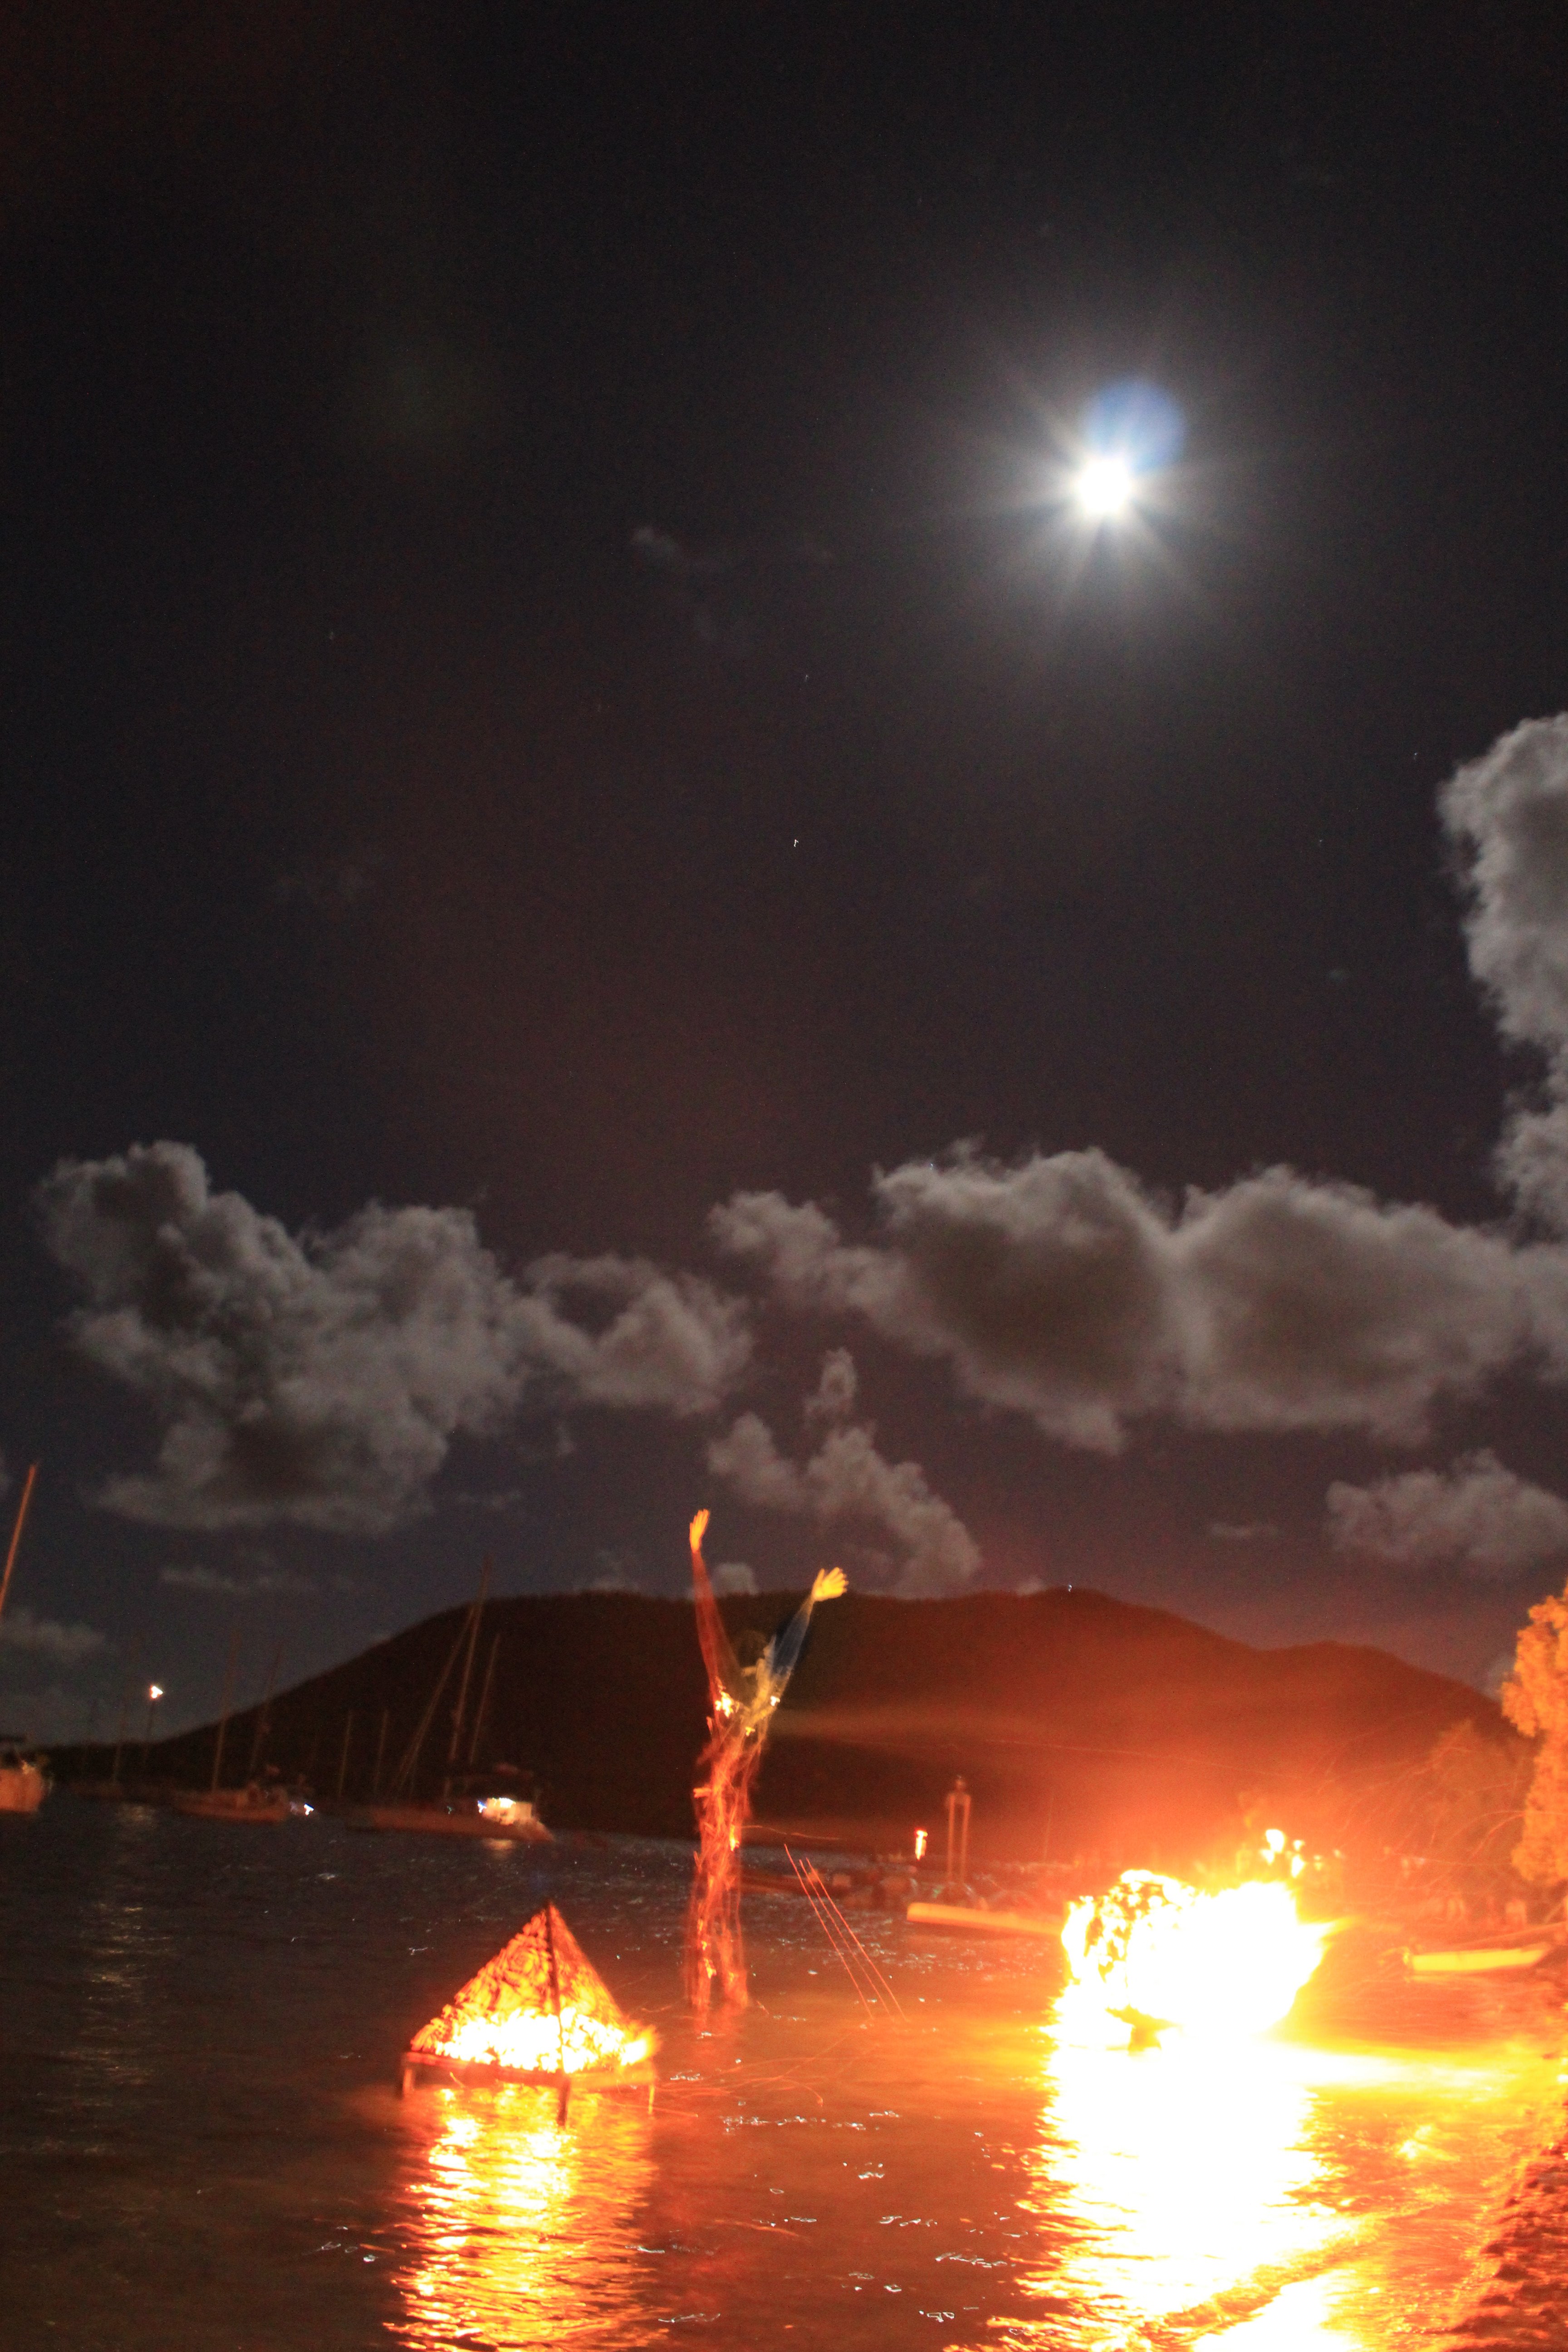 THE FULL MOON PARTY IS AN EVENT TO ENJOY!